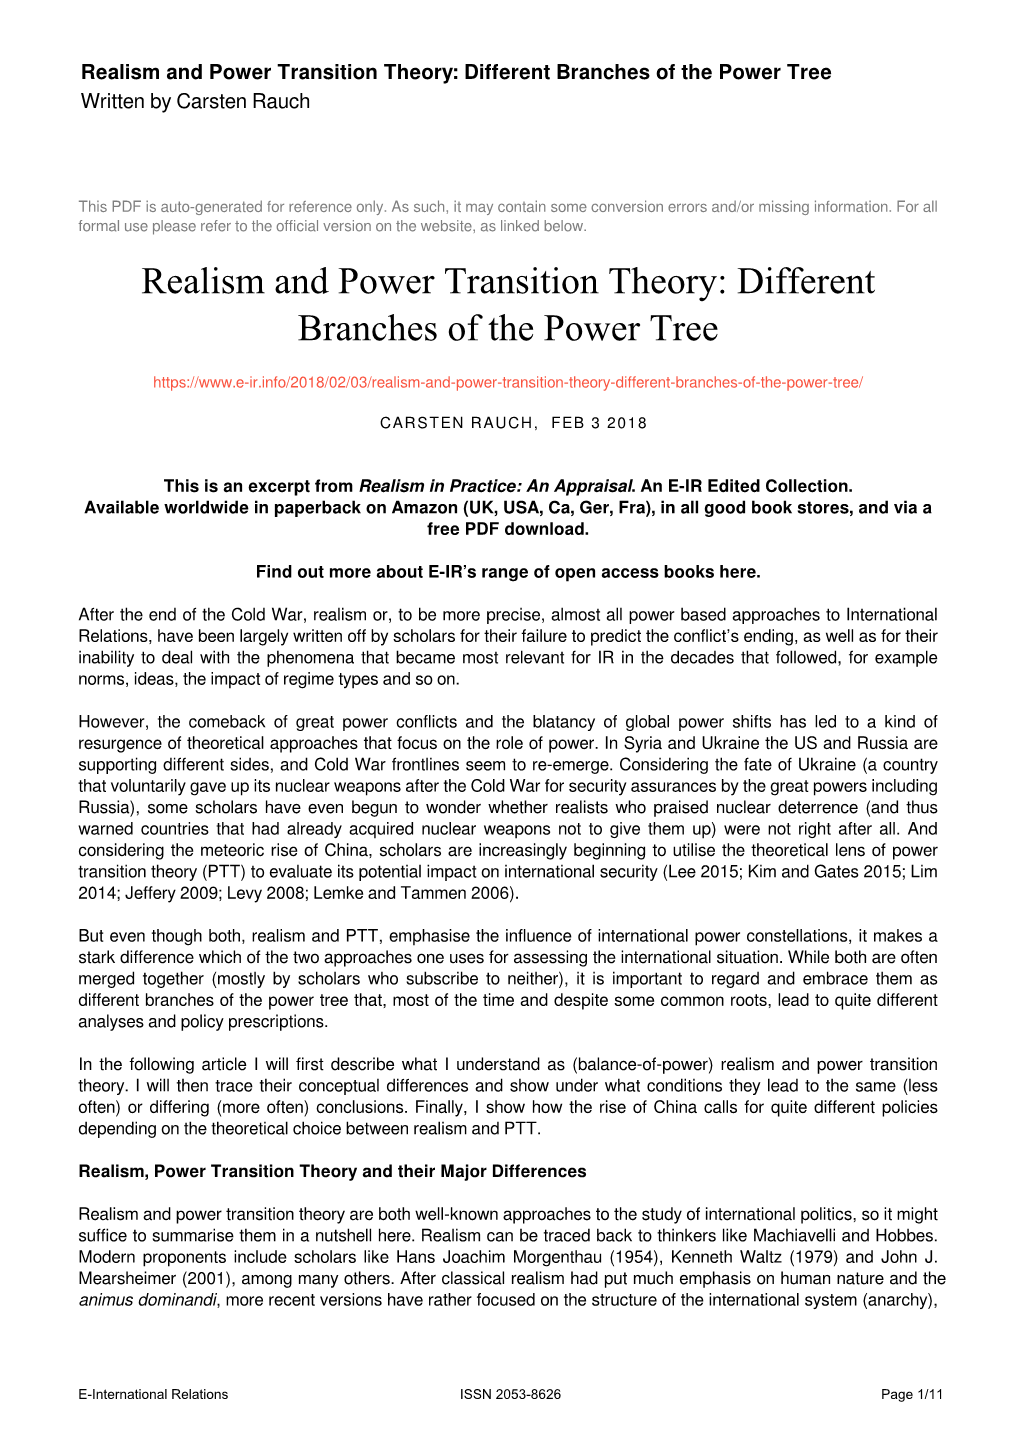 Realism and Power Transition Theory: Different Branches of the Power Tree Written by Carsten Rauch